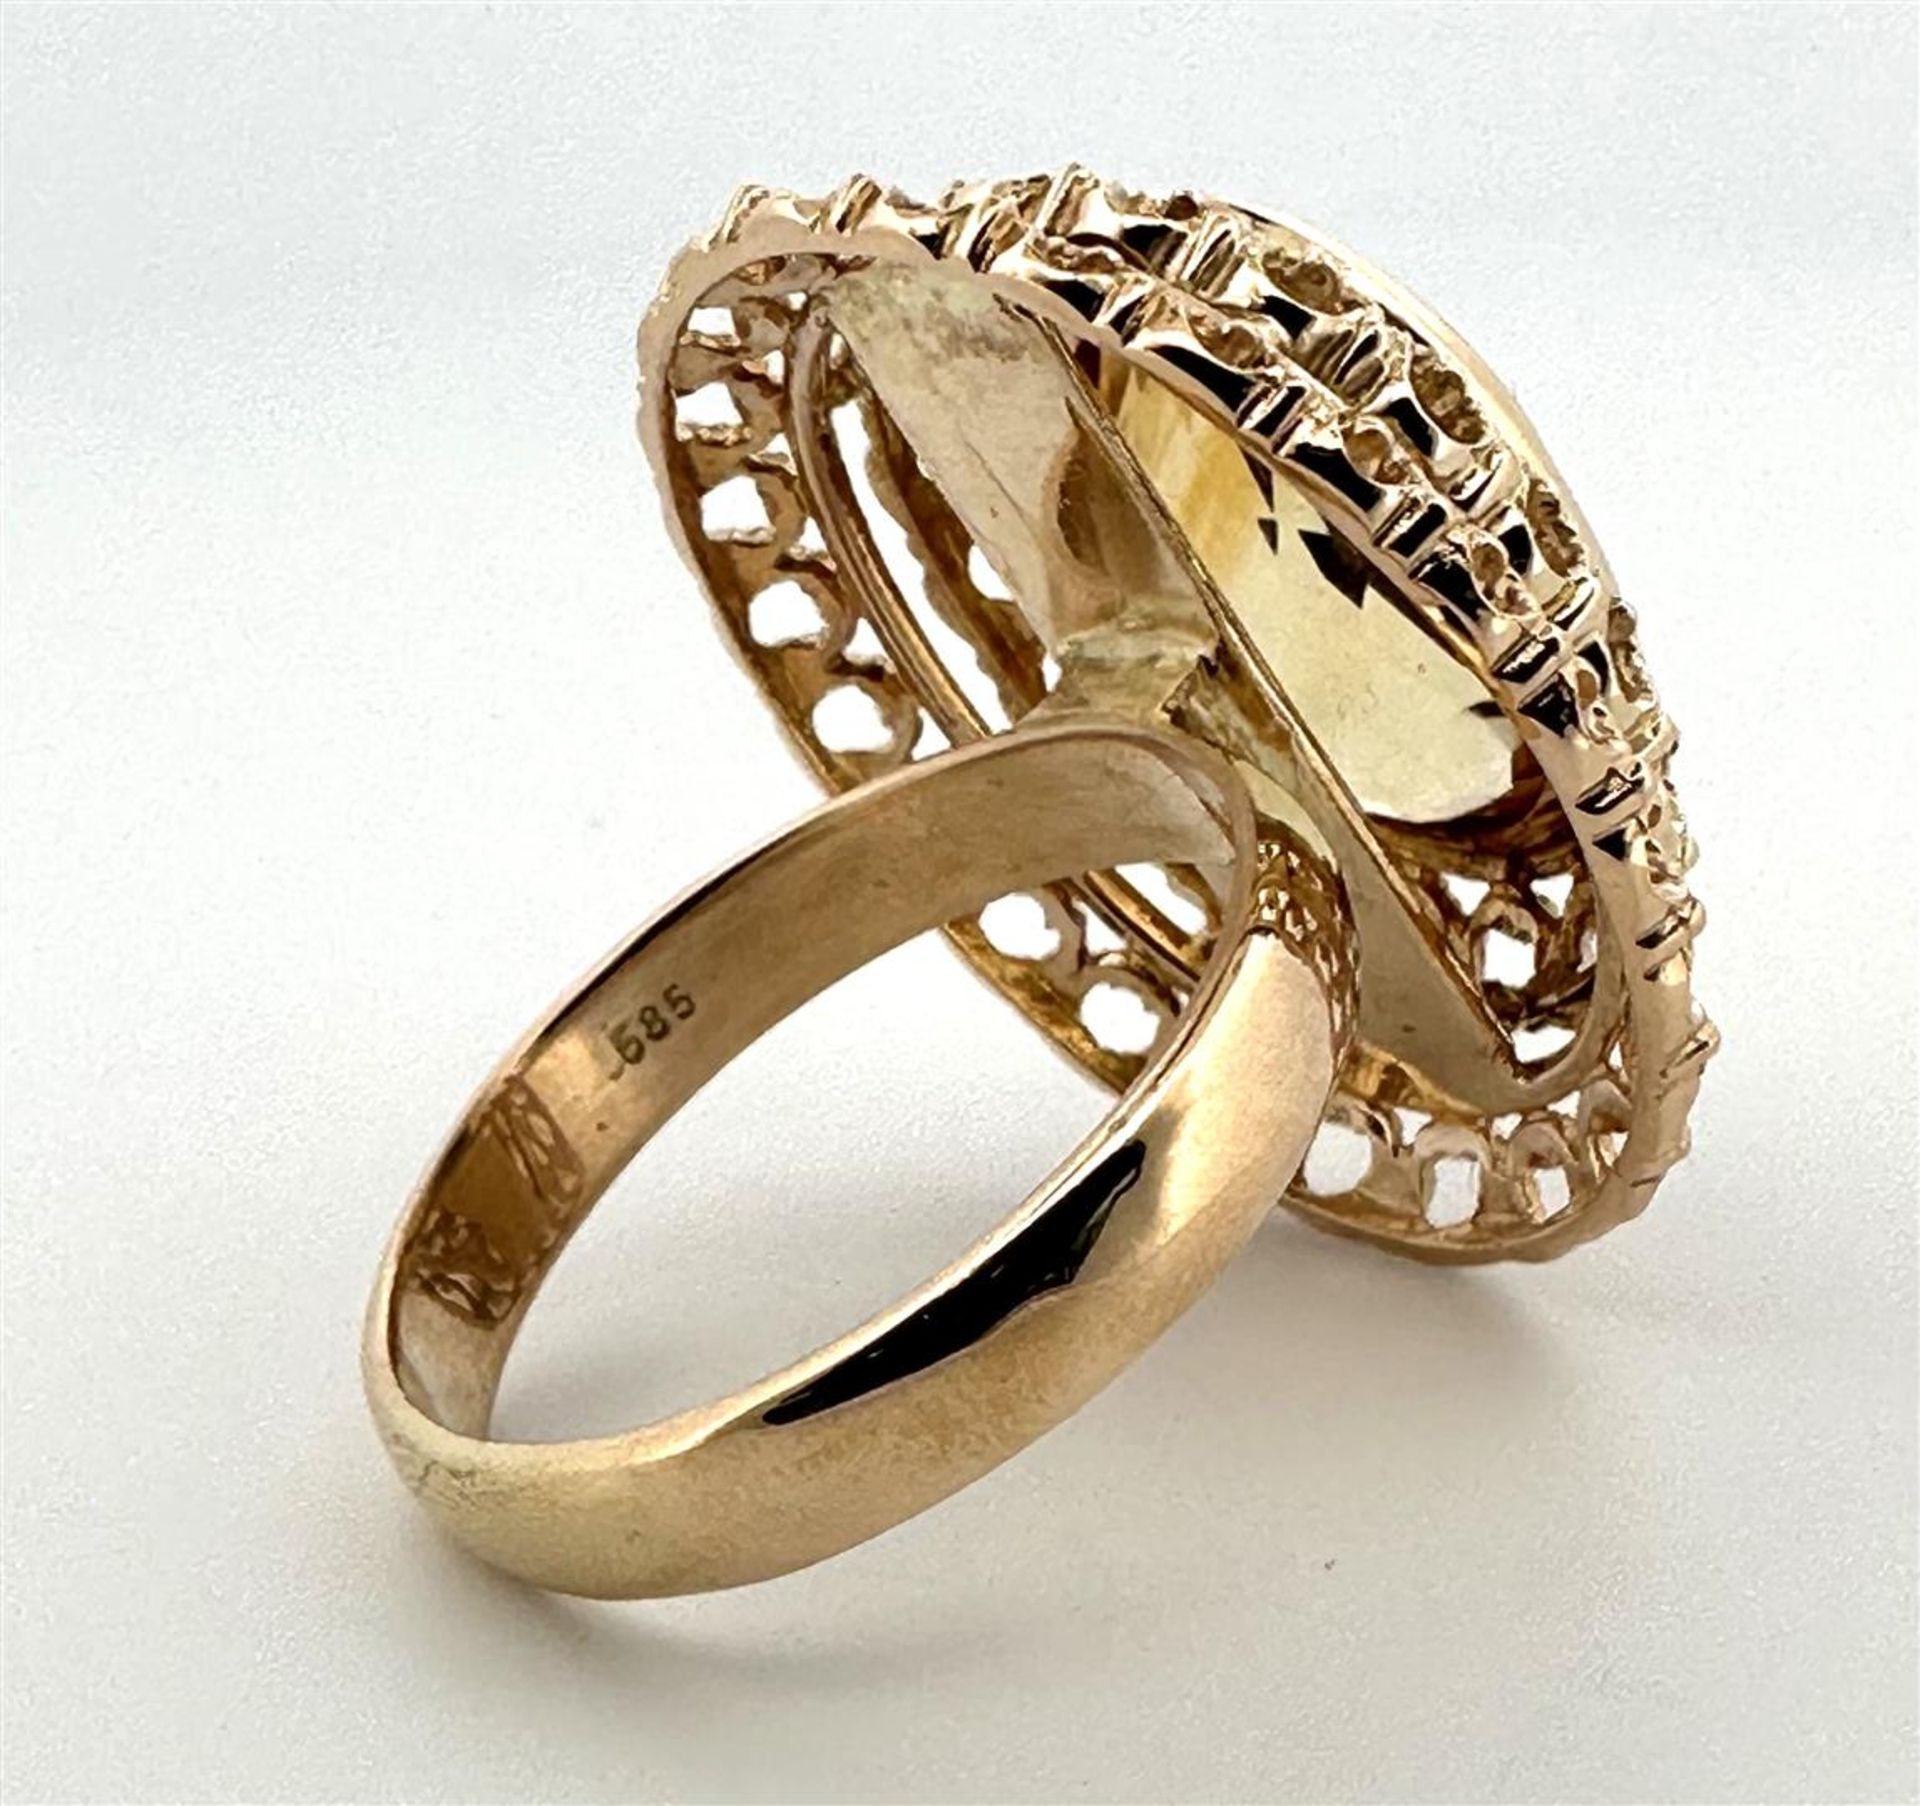 14kt yellow gold statement cocktail ring with citrine. 
The ring has a beautiful openwork double edg - Bild 4 aus 6